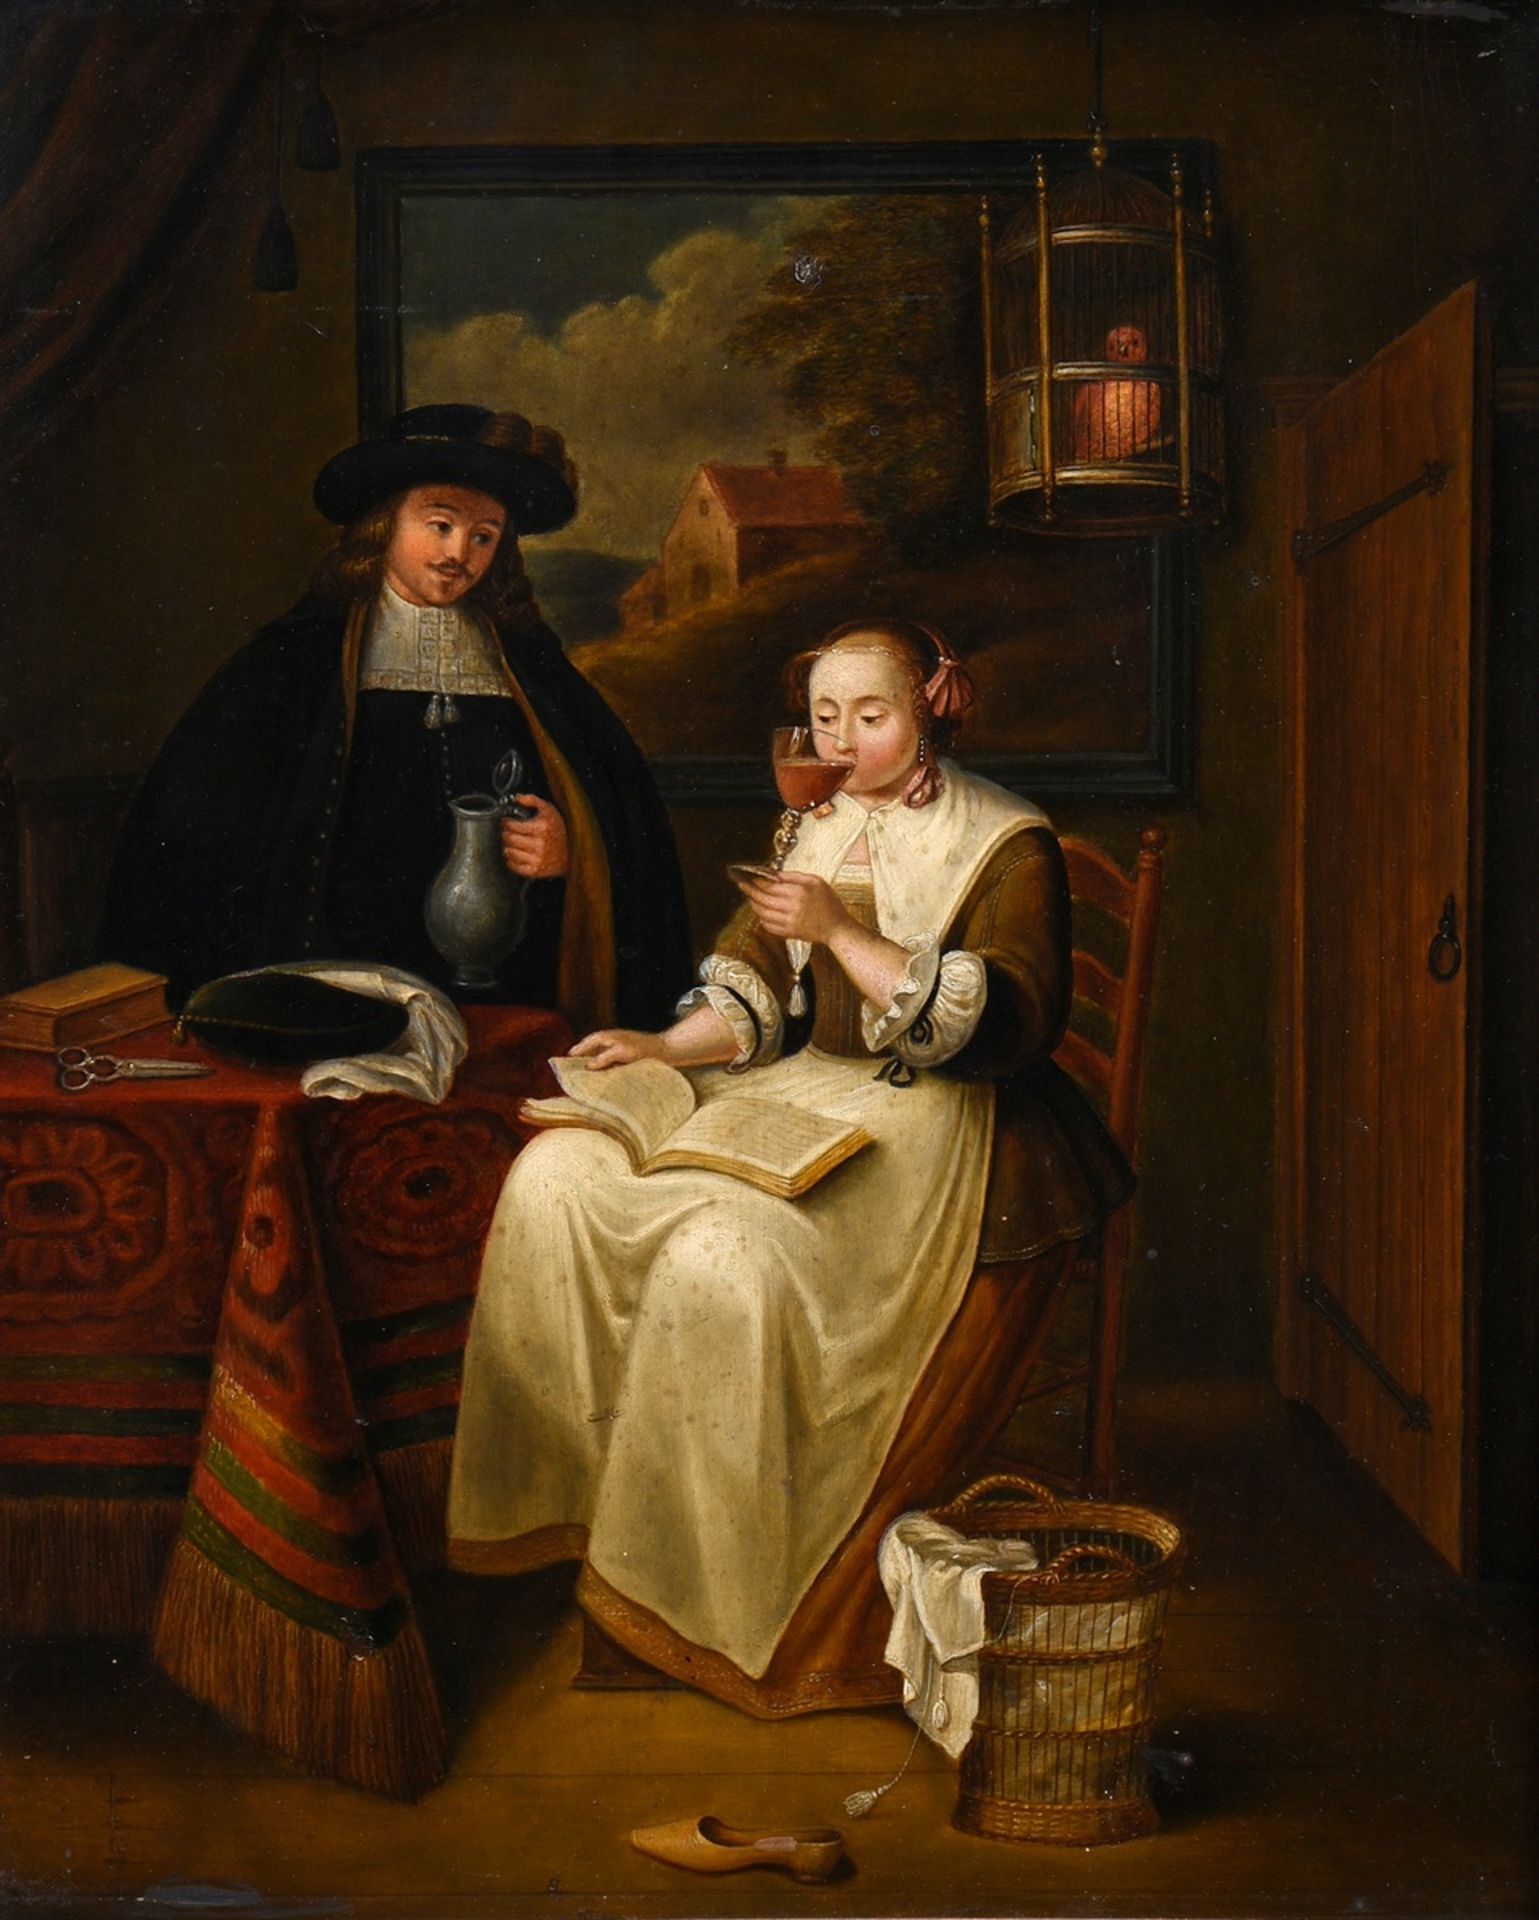 Unknown artist of the 18th c. "Dutch interior scene with couple at wine tasting", oil/wood, magnifi